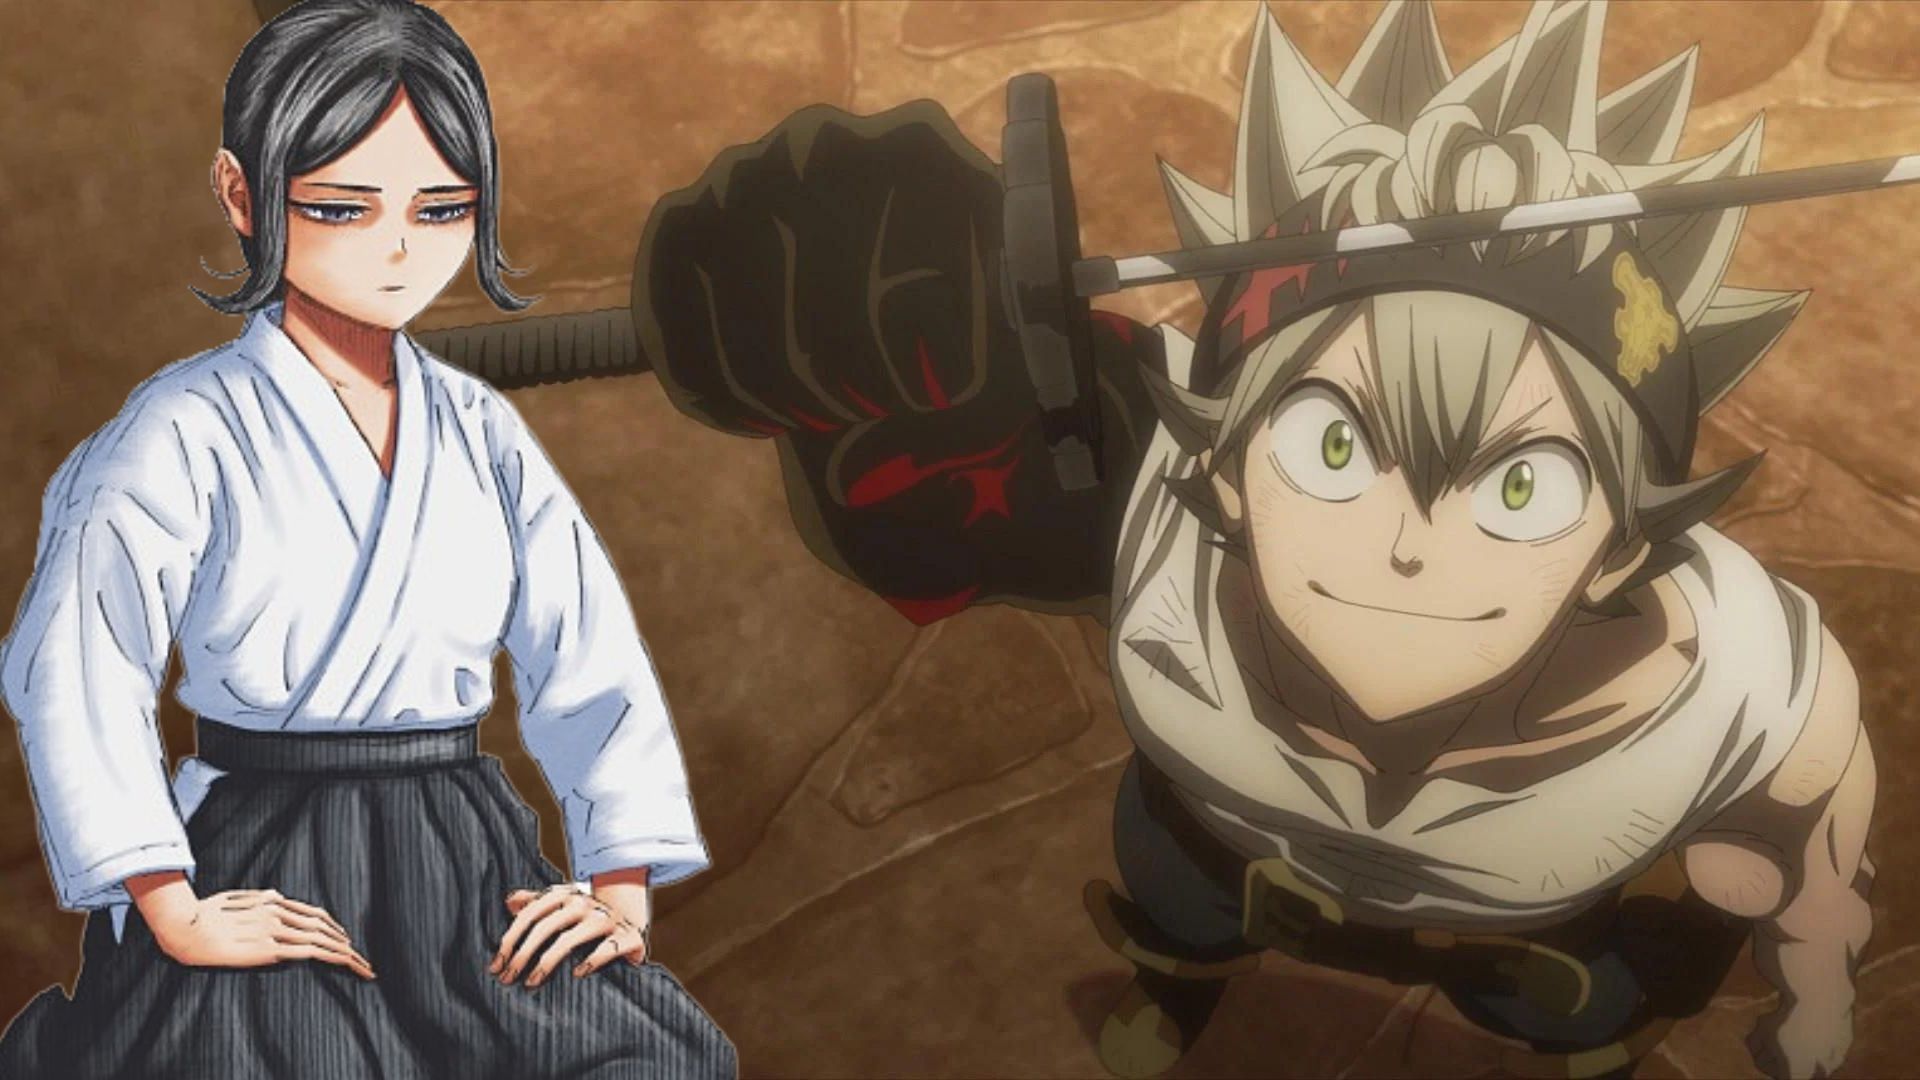 Ichika and Asta as seen in Black Clover